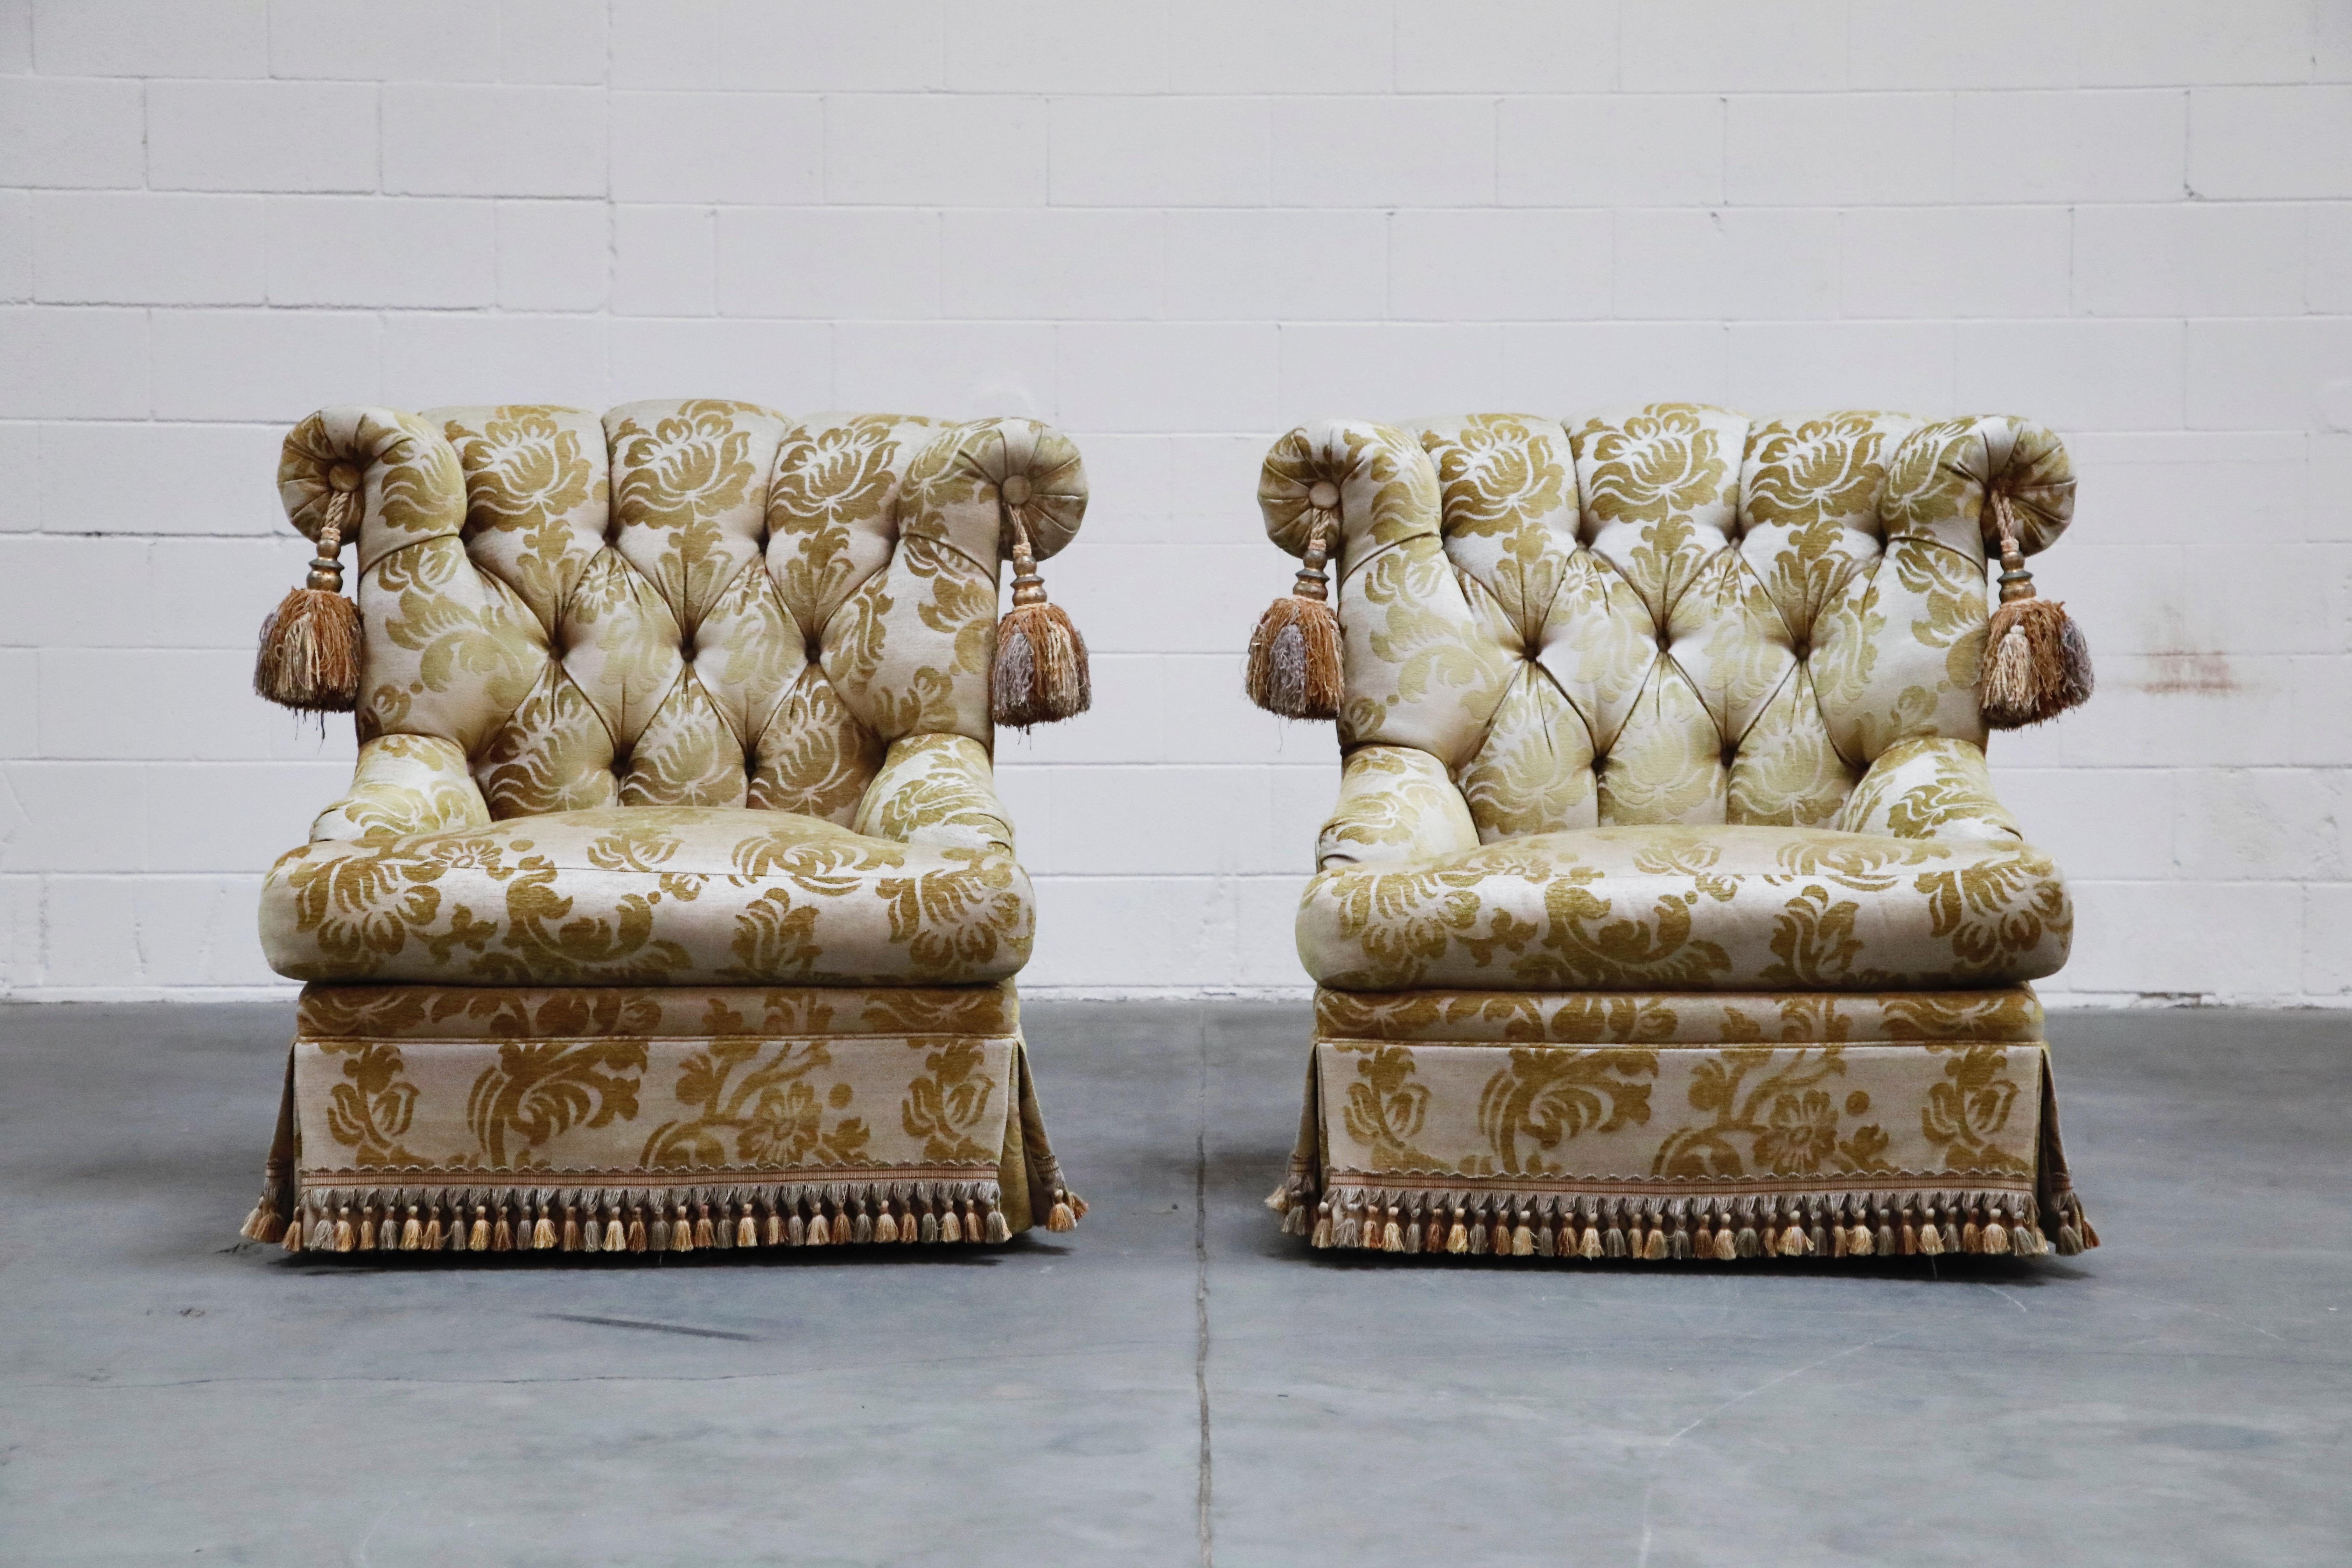 These tufted slipper lounge chairs by Erwin Lambeth for Tomlinson are so incredible, from the gorgeous cut velvet upholstery to the fringe base borders and large oversized coordinating tassels to the ornate floral pattern to the deeply tufted